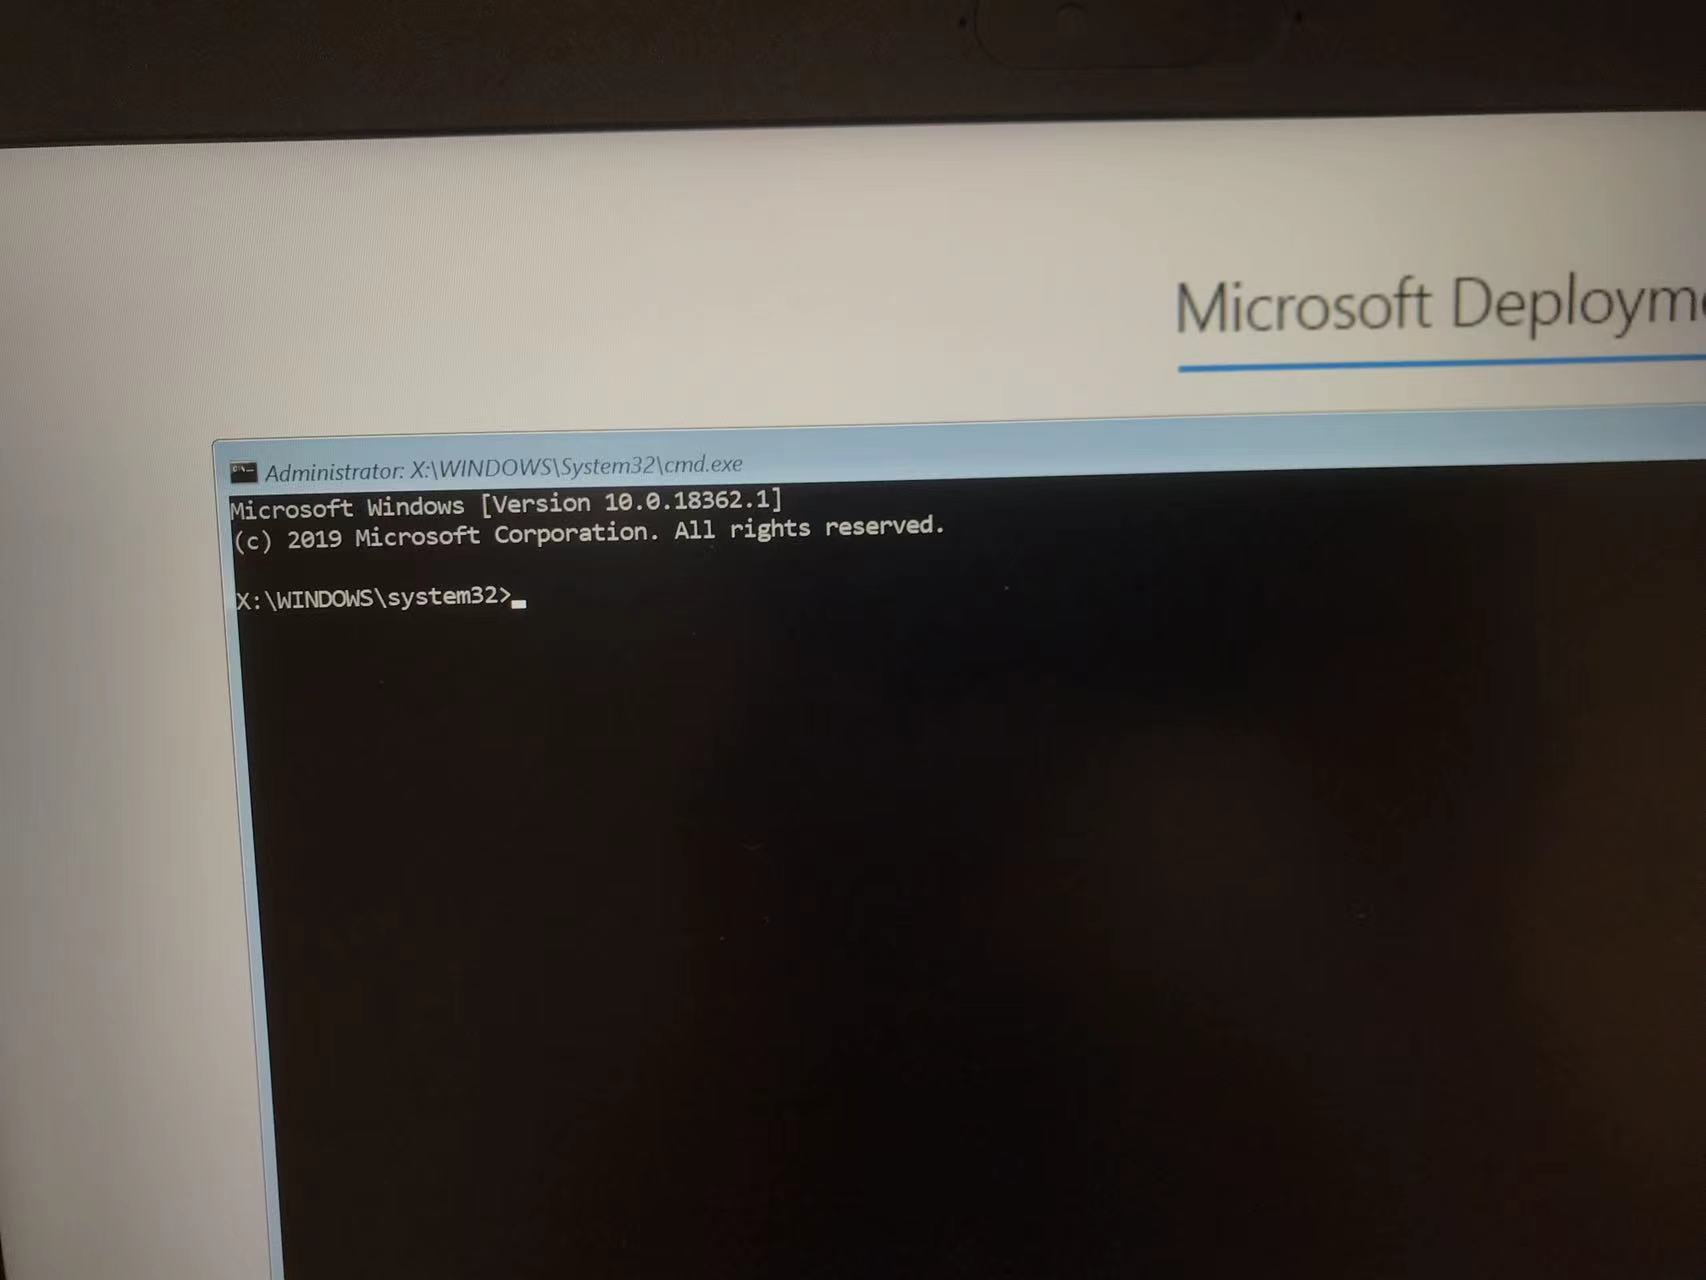 MDT installed HP430G7 failed and ended up with X:\WINDOWS\system32 cmd  window - Microsoft Q&A